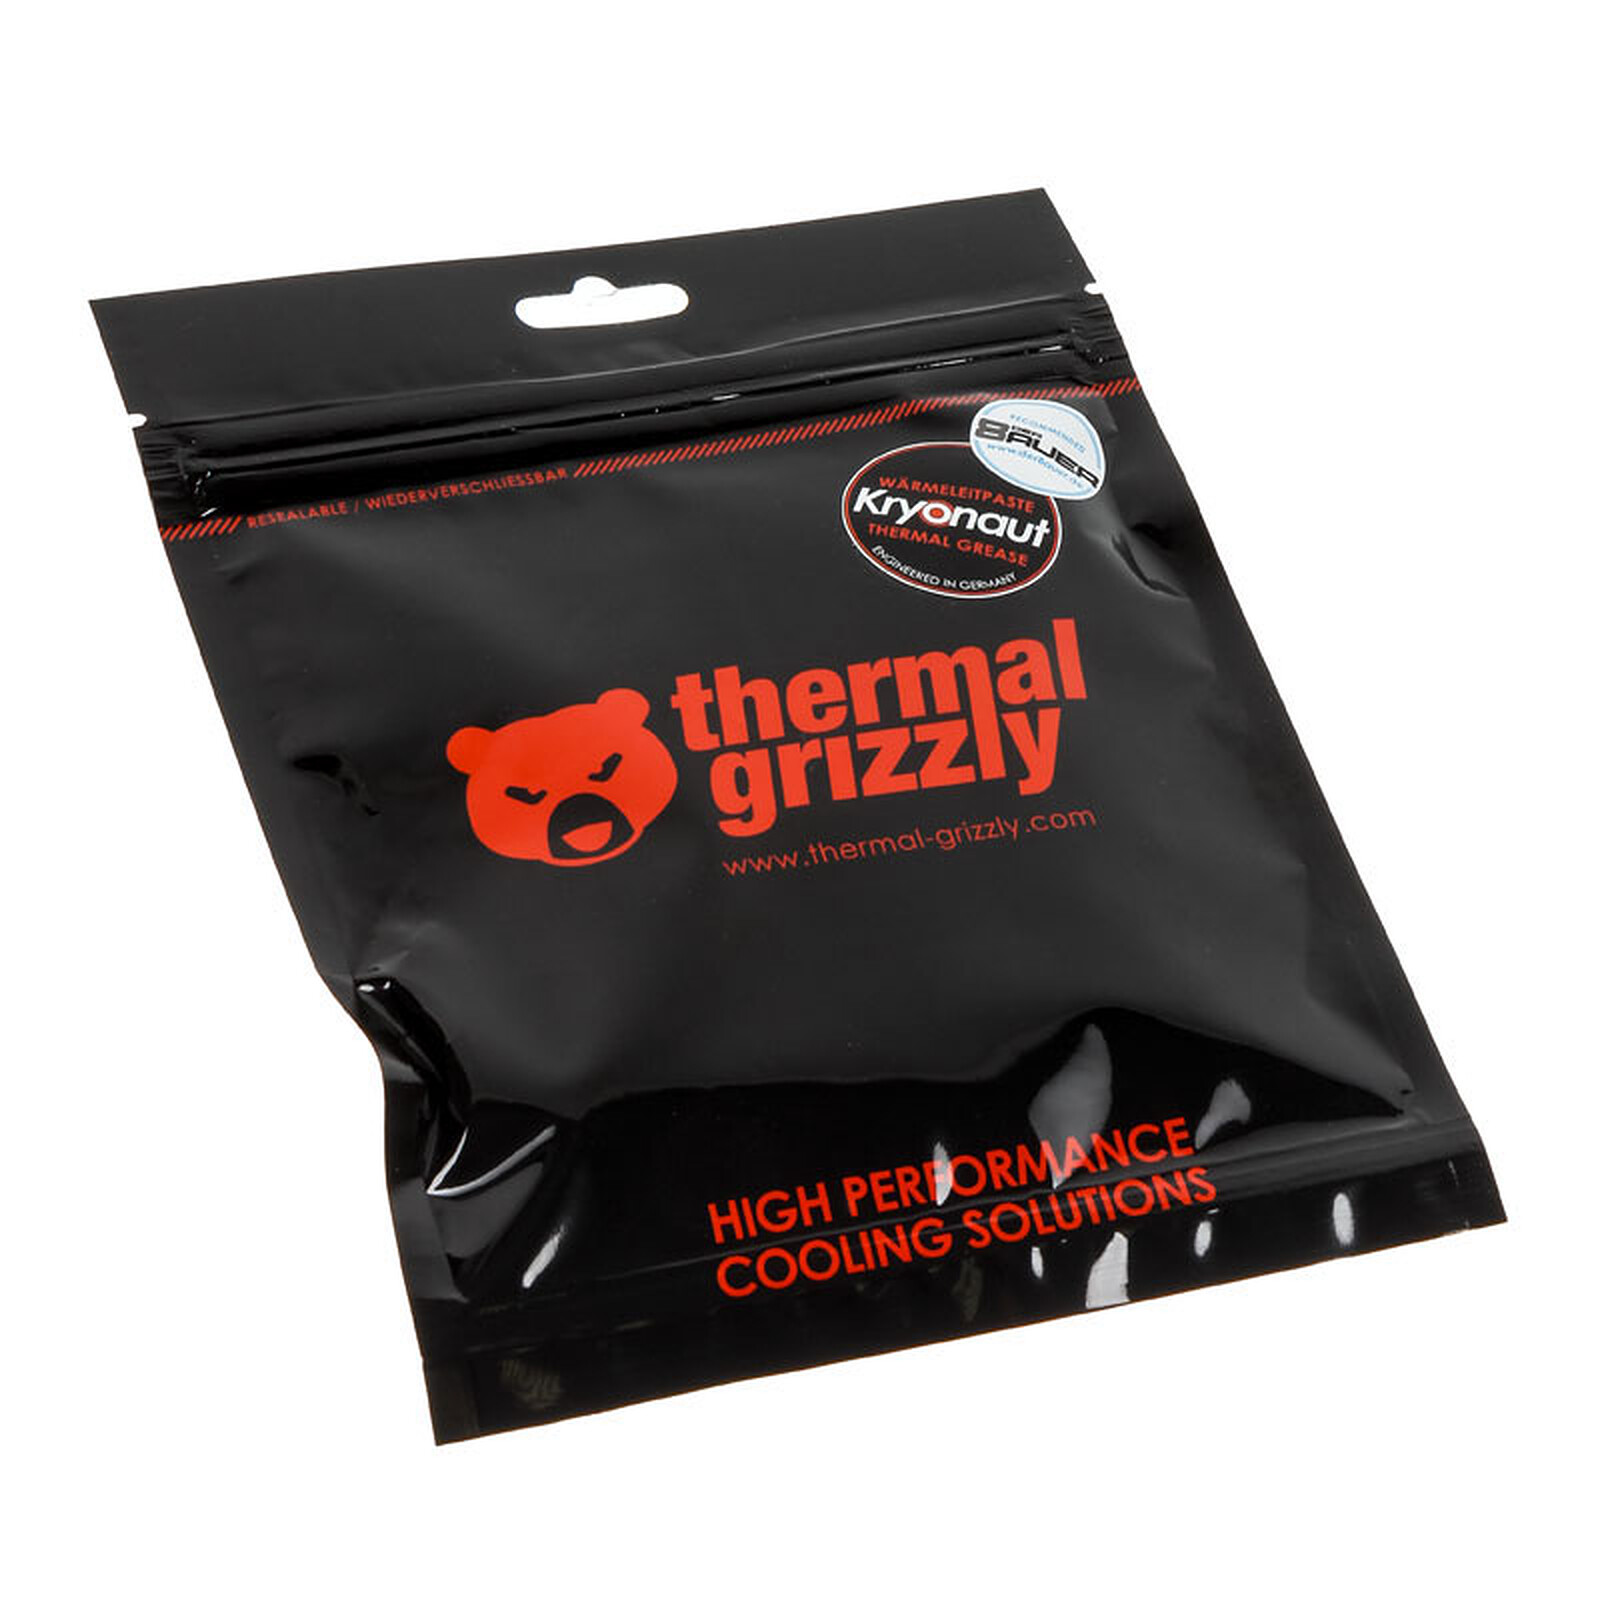 Thermal Grizzly Kryonaut (37 grammes) - Pâte thermique PC